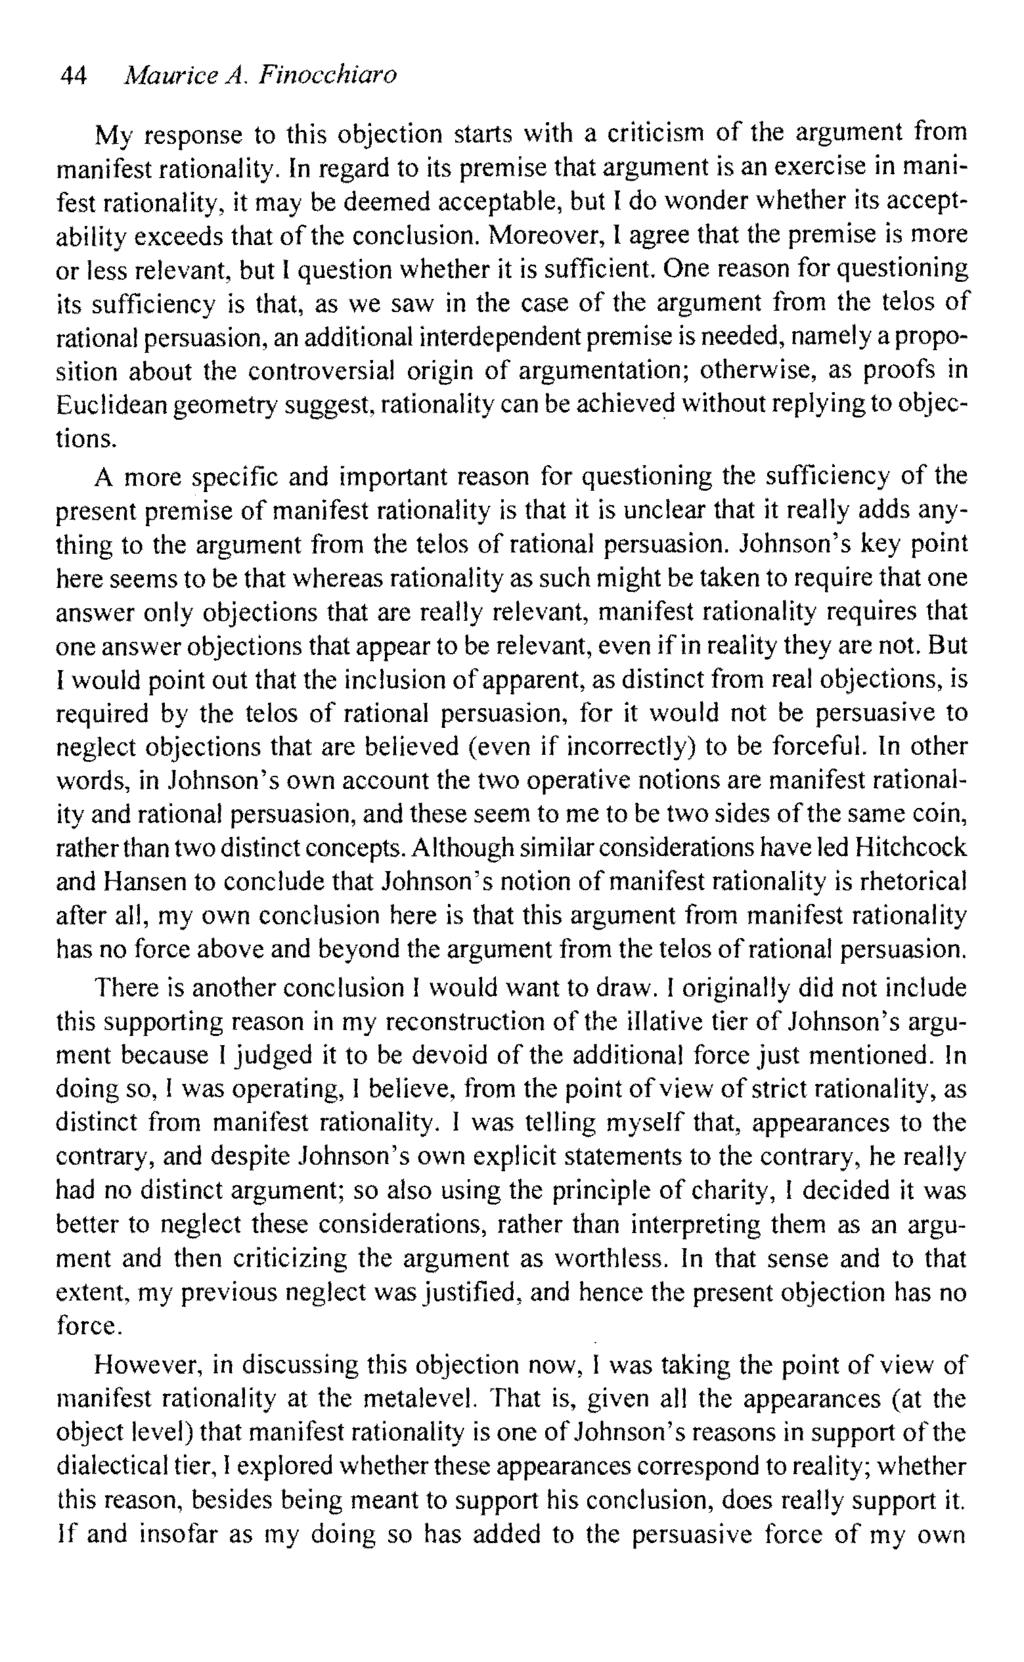 44 Maurice A. Finocchiaro My response to this objection starts with a criticism of the argument from manifest rationality.